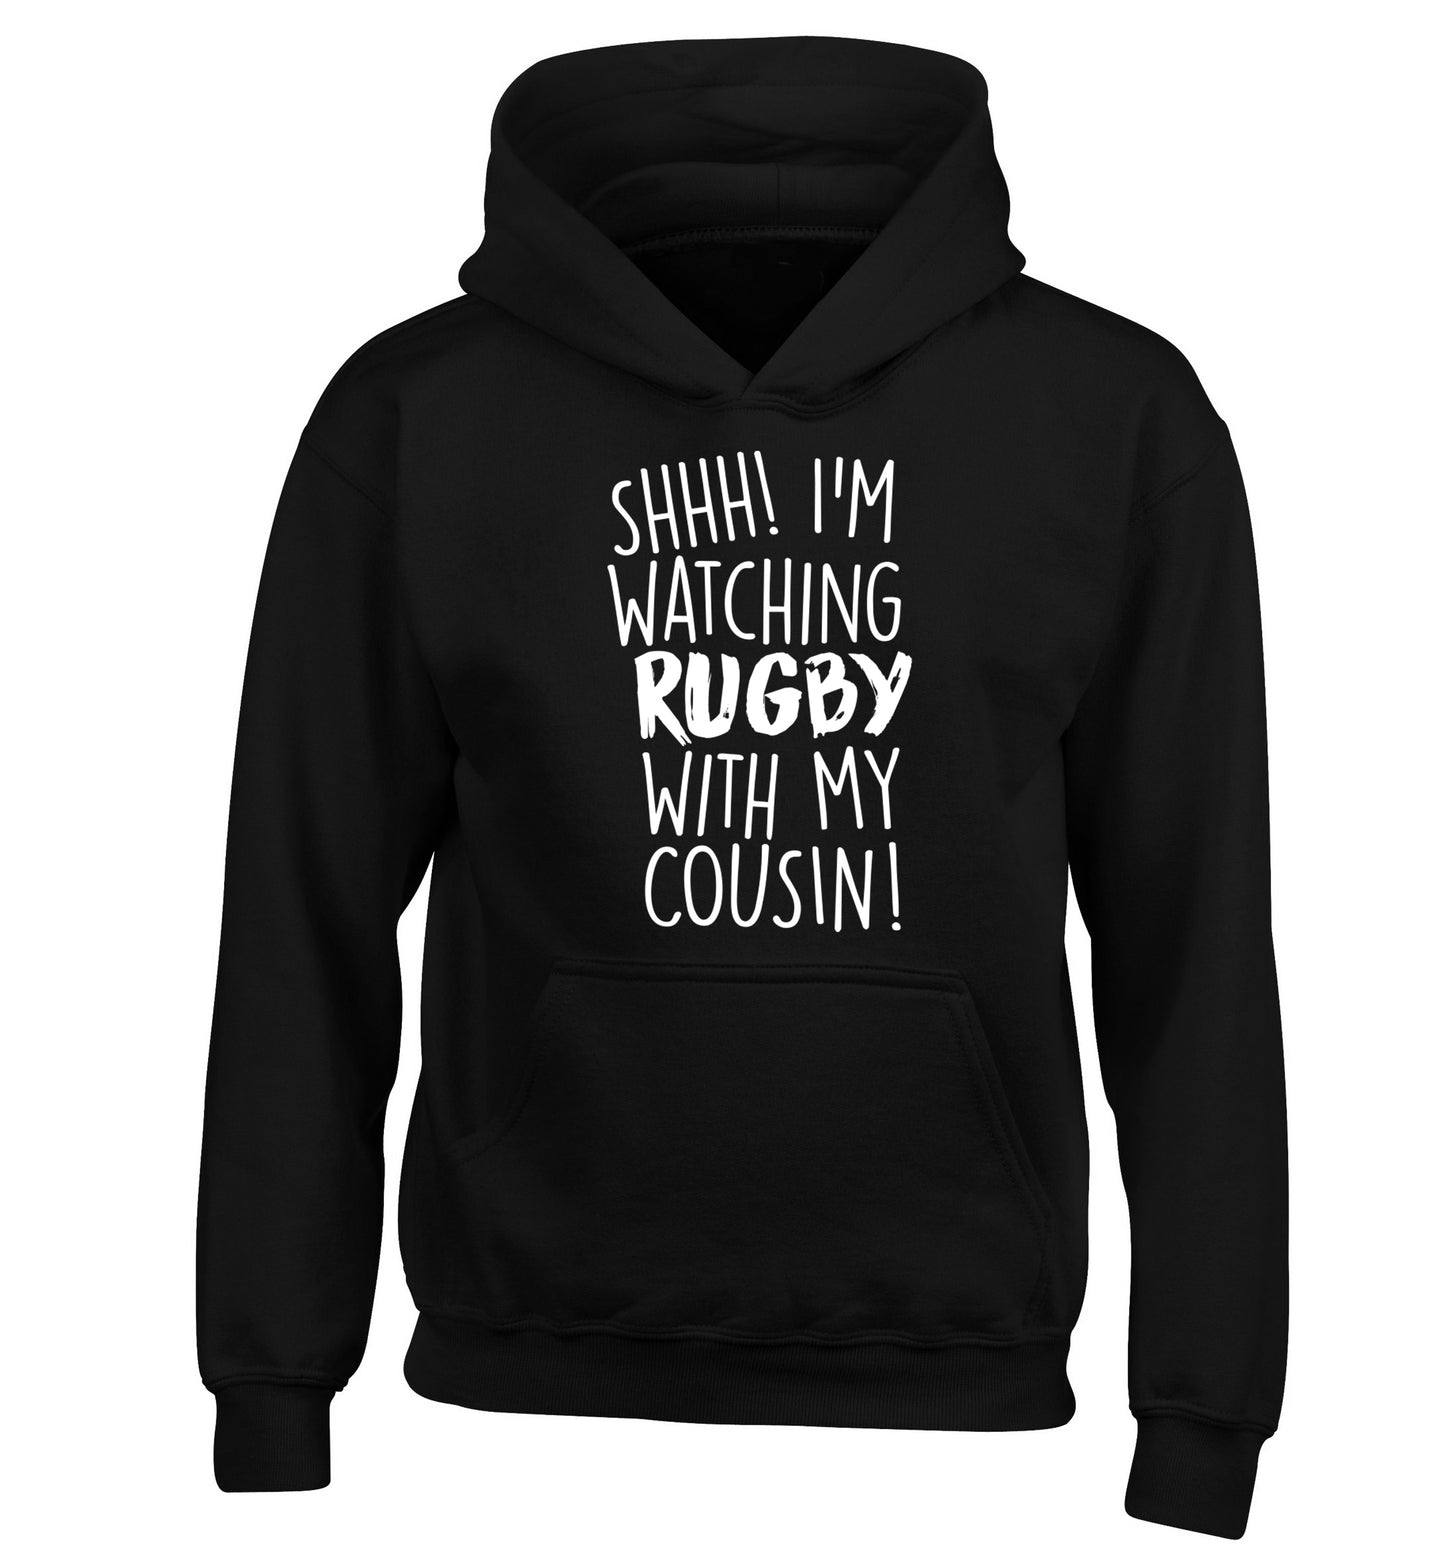 Shhh I'm watching rugby with my cousin children's black hoodie 12-13 Years